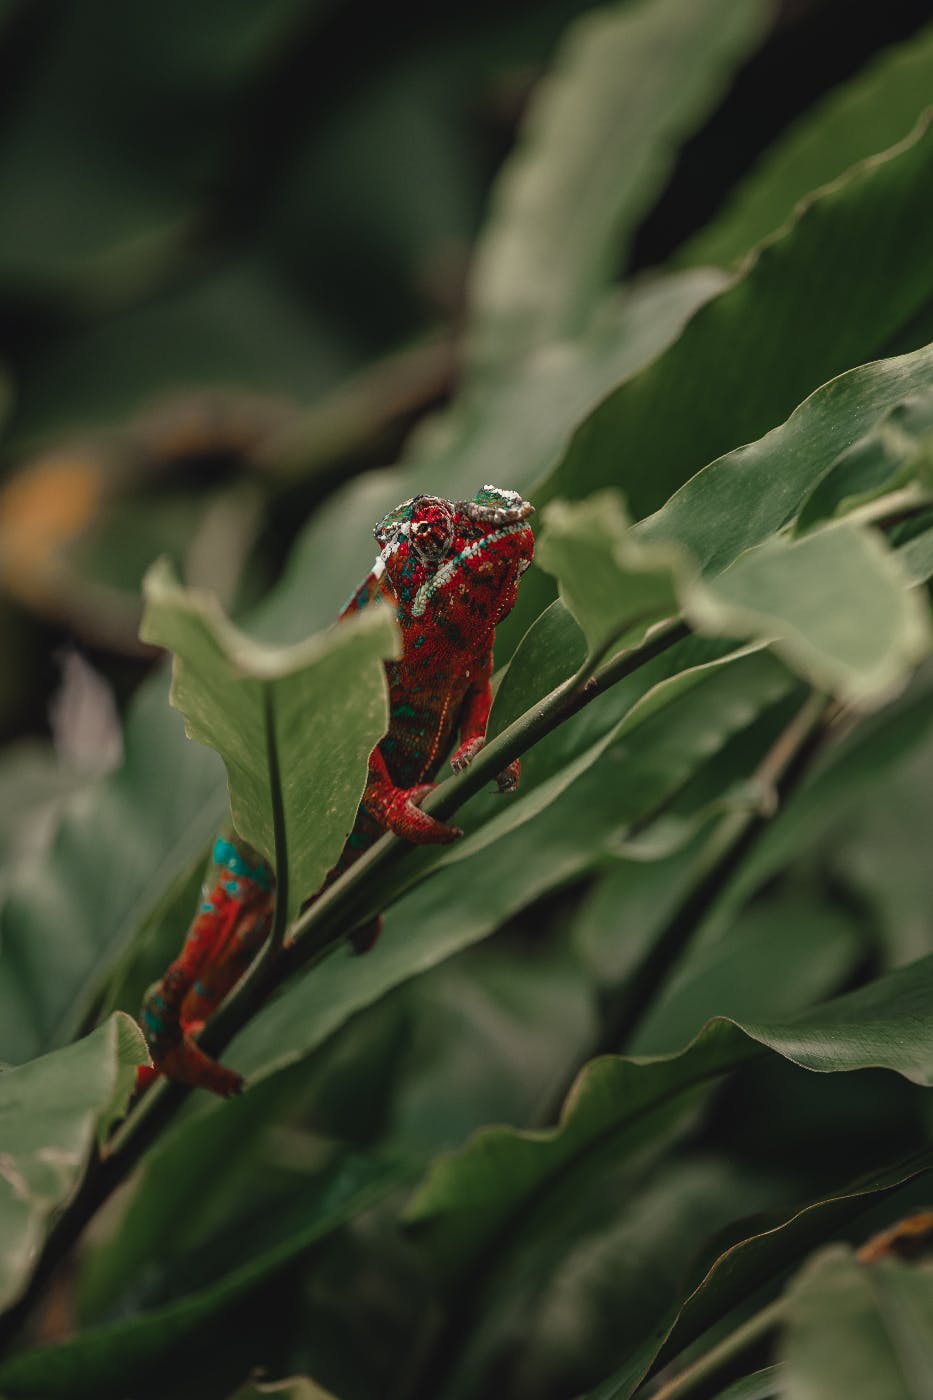 A red lizard among green leaves